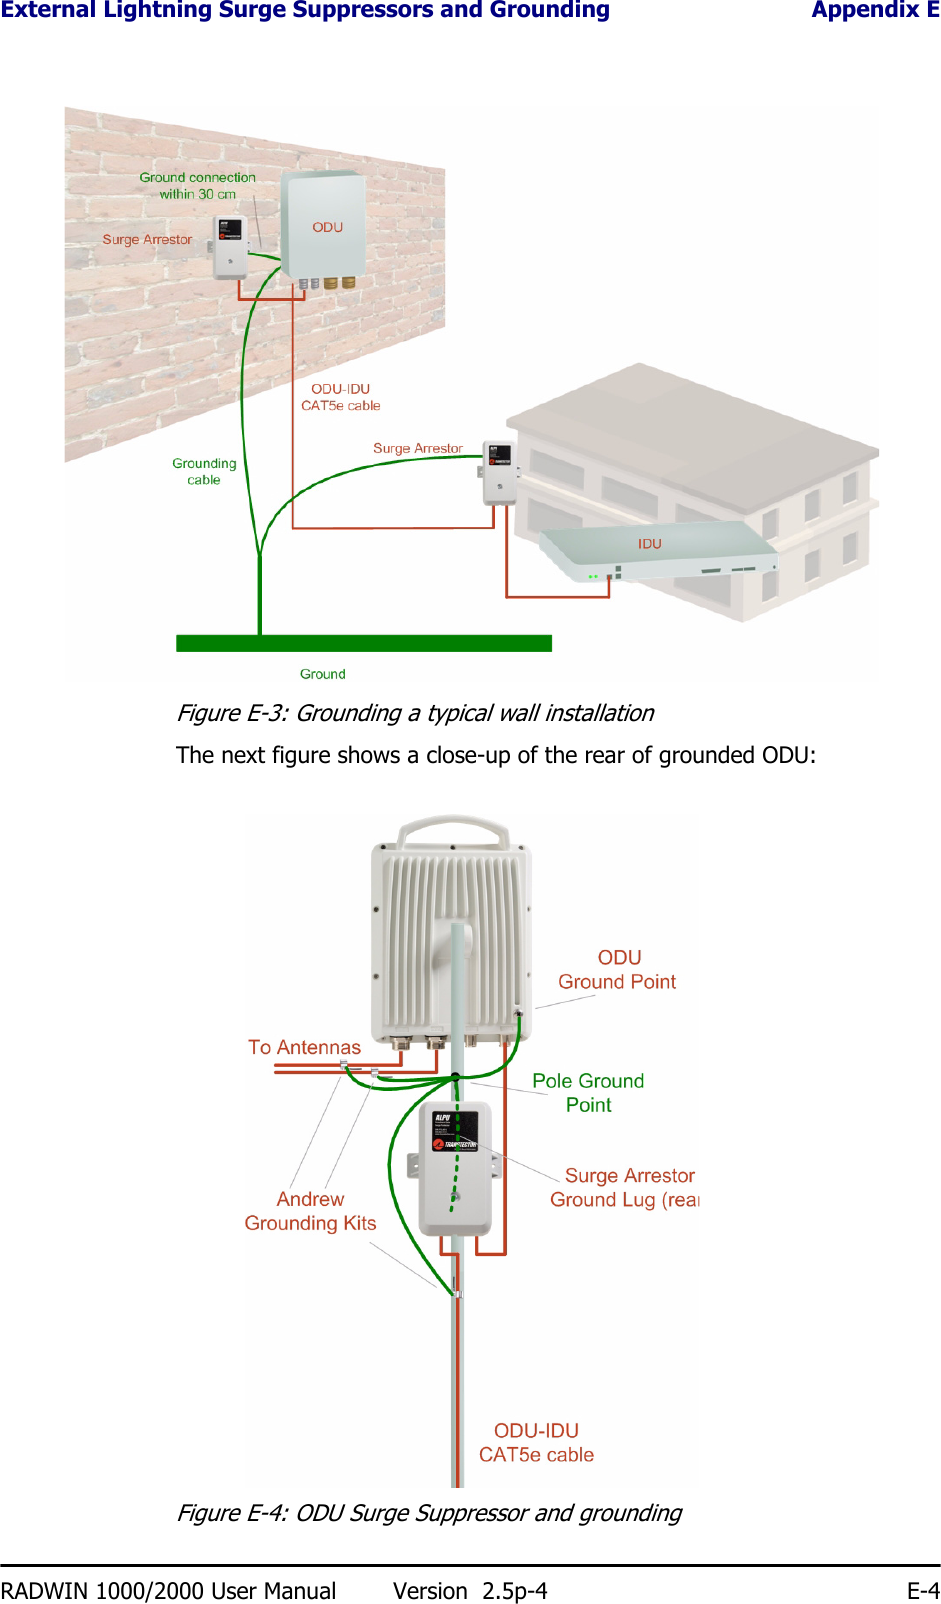 External Lightning Surge Suppressors and Grounding Appendix ERADWIN 1000/2000 User Manual Version  2.5p-4 E-4Figure E-3: Grounding a typical wall installationThe next figure shows a close-up of the rear of grounded ODU:Figure E-4: ODU Surge Suppressor and grounding